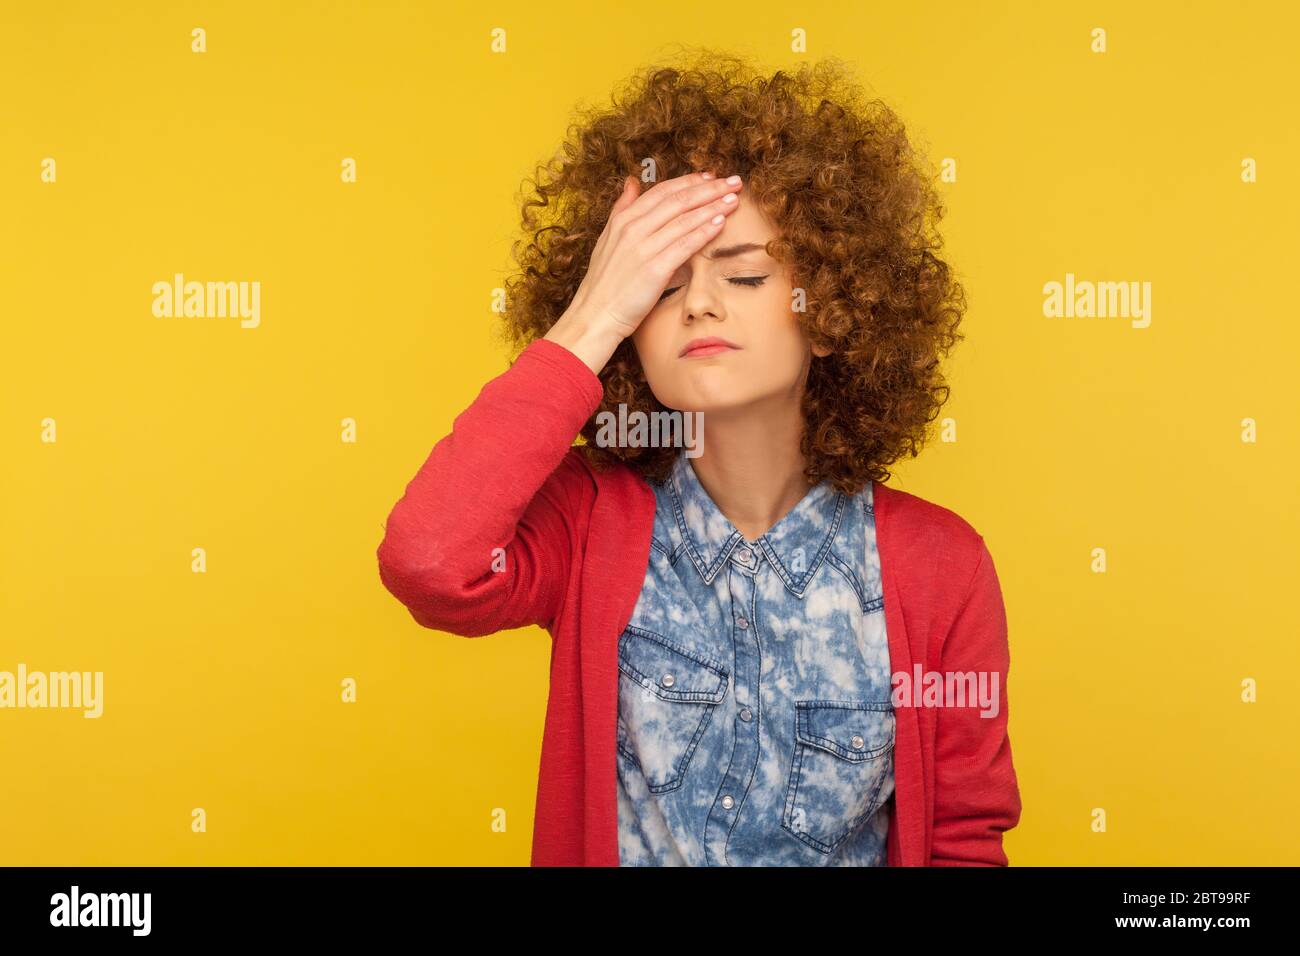 Facepalm. Portrait of depressed woman with curly hair slapping forehead in regret gesture, blaming herself, feeling shame and sorrow, body language. i Stock Photo